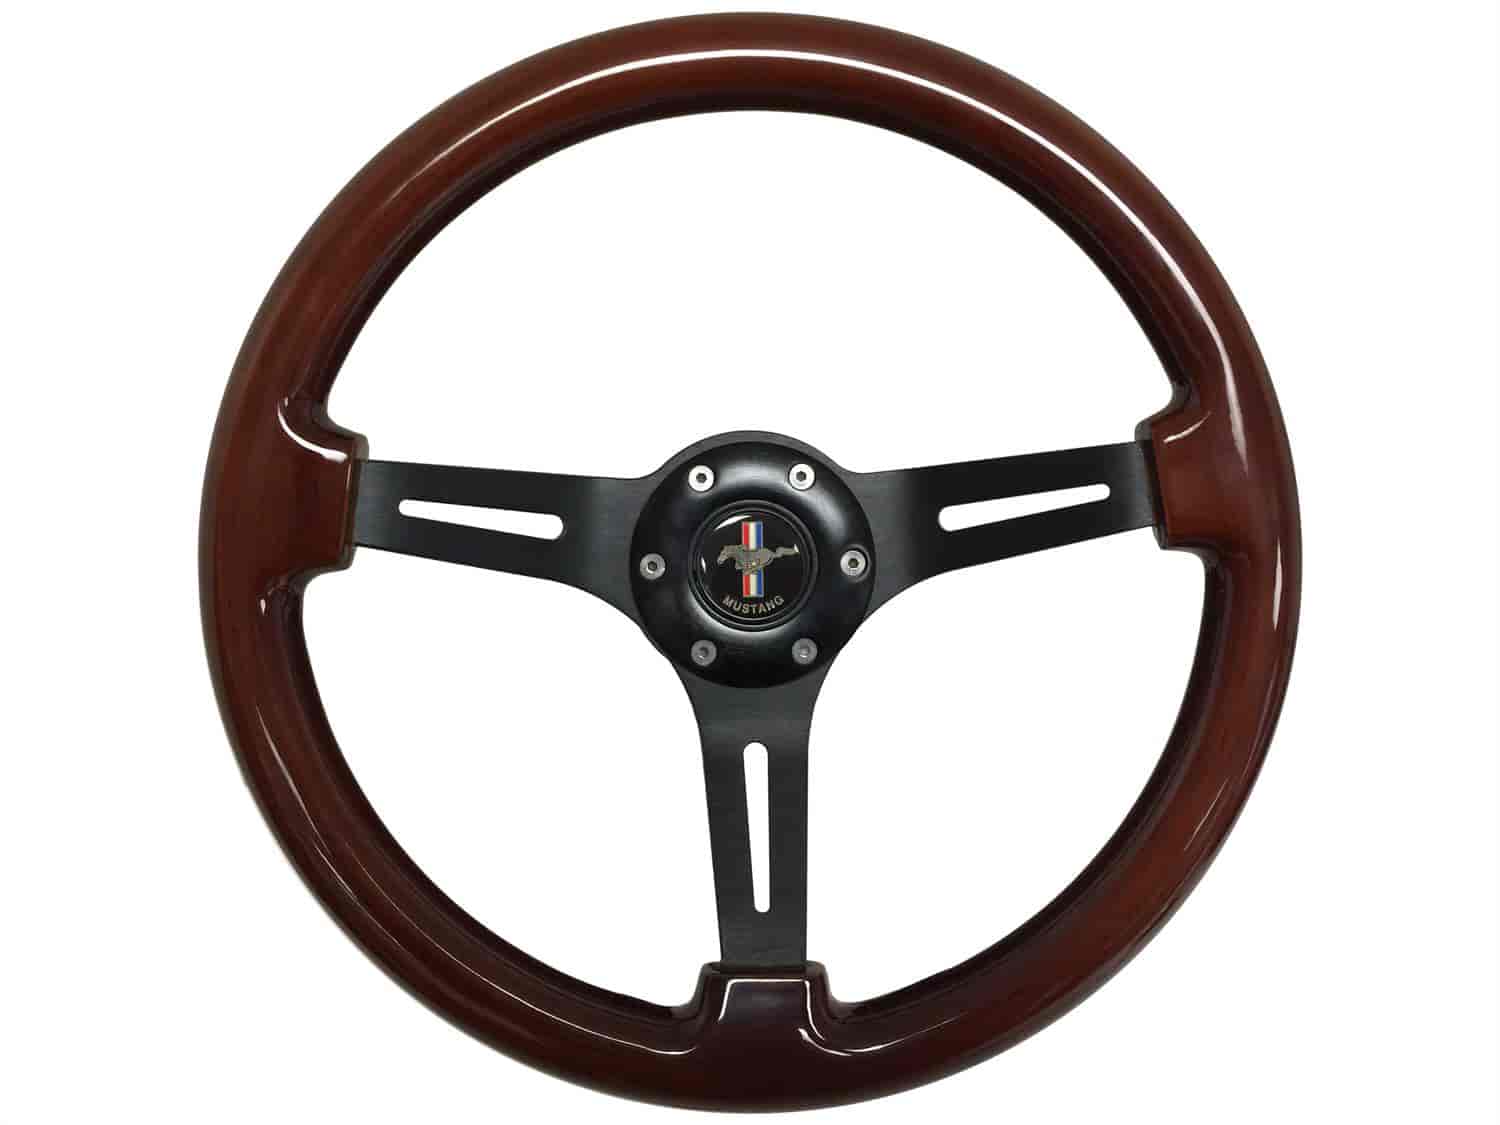 S6 Sport Steering Wheel Kit for 1984-1994 Ford Mustang, 14 in. Diameter, Mahogany Wood Grip, with 6-Bolt Adapter and Horn Button